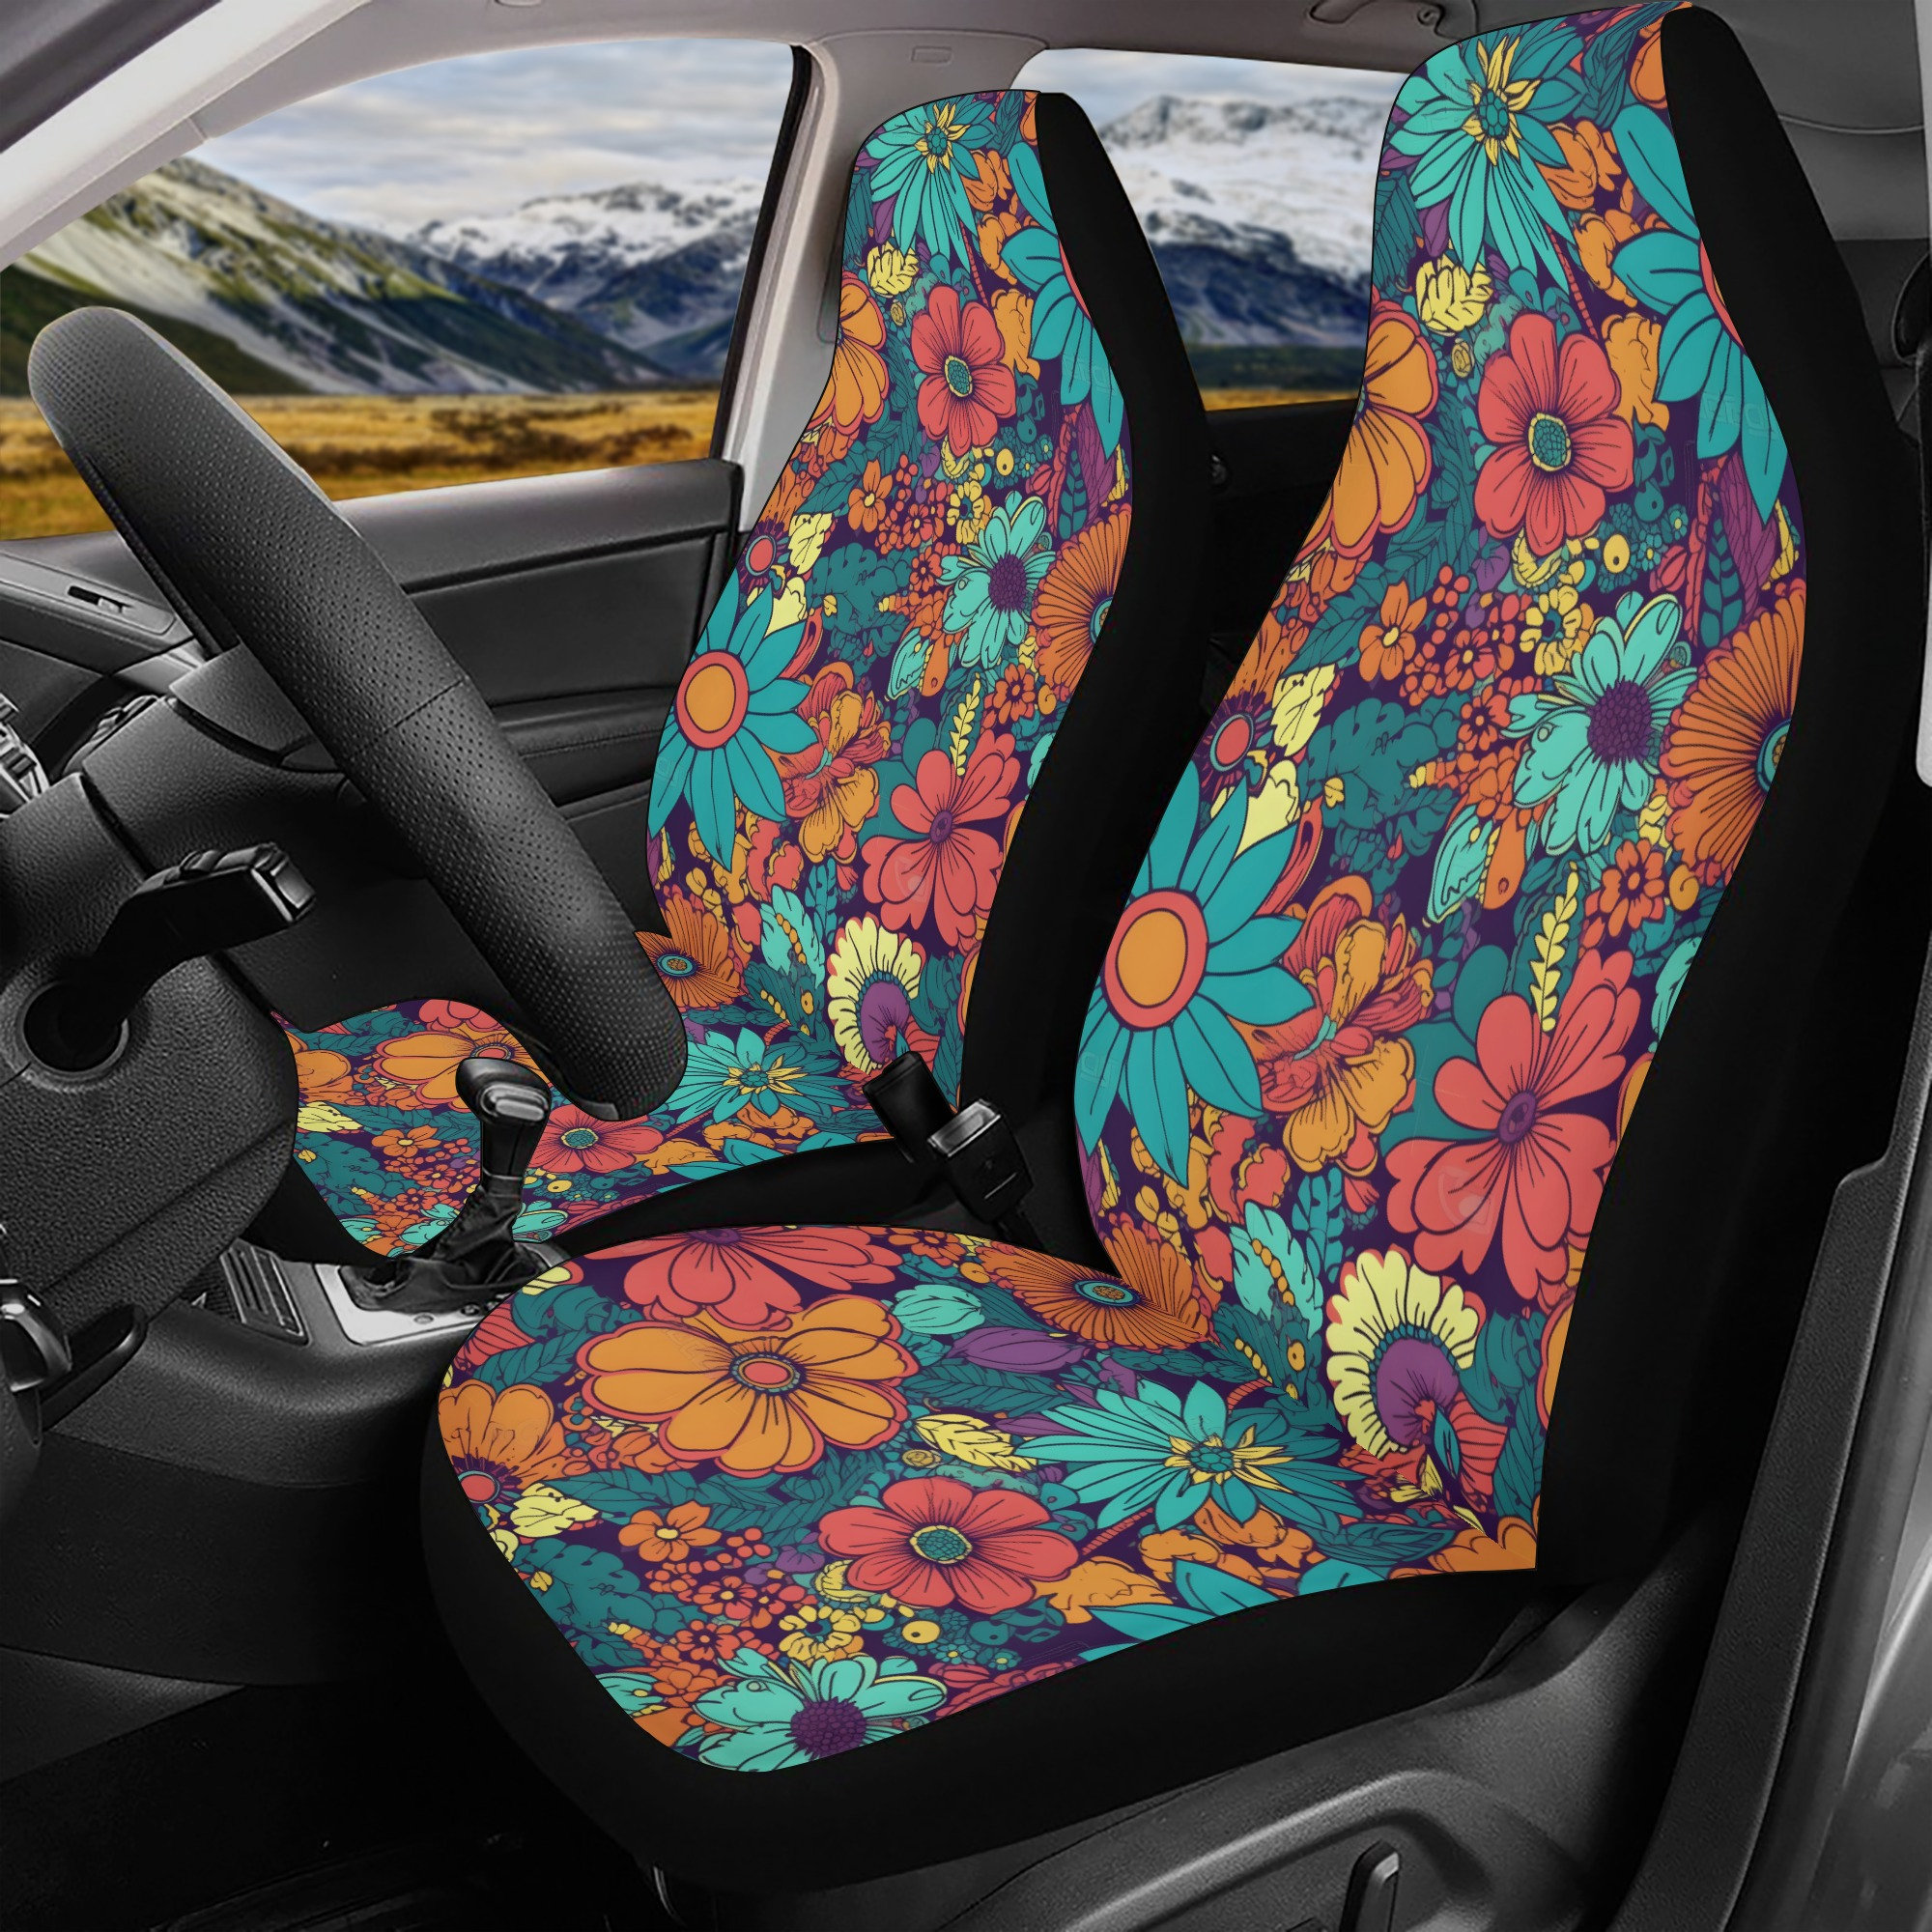 Owleys Dog Car Seat Cover Dog Car Hammock Back Seat Cover For Dogs  Waterproof Dog Mat For Cars Pet Backseat Protector Dog Rear Seat Covers For  Trucks Car Dog Canopy SUVs Seat